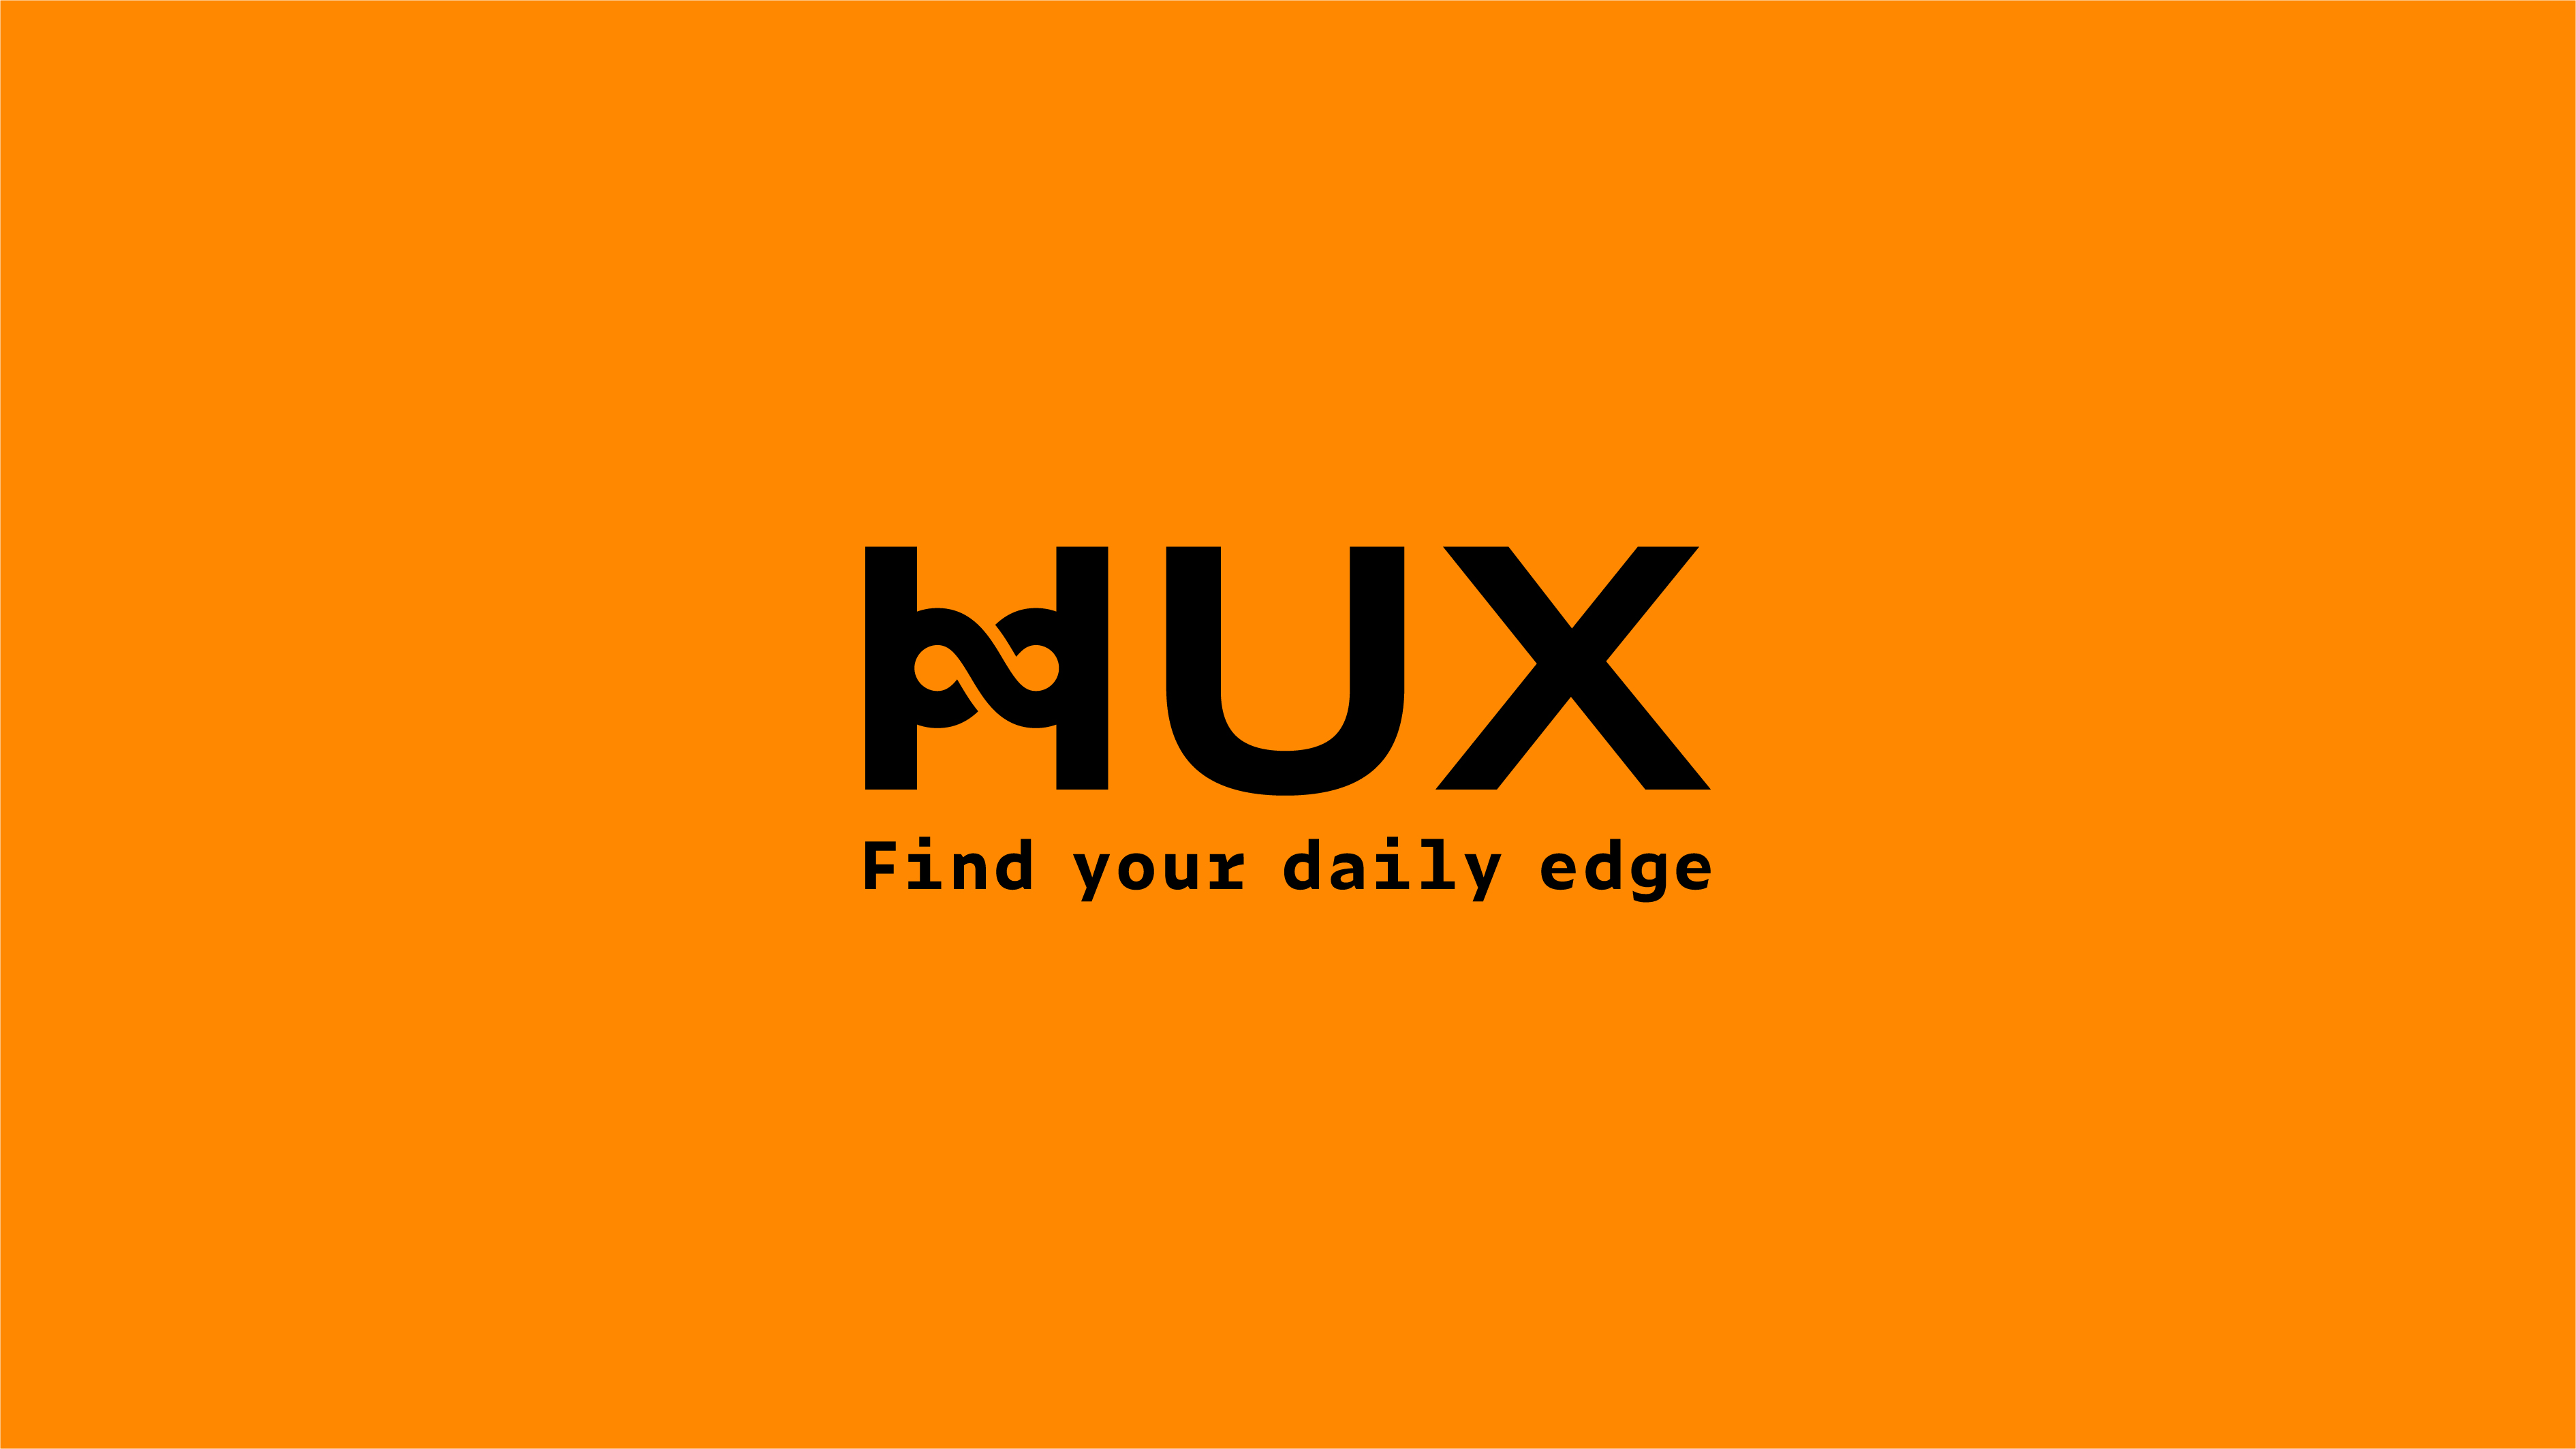 Branding for HUX – Find Your Daily Edge